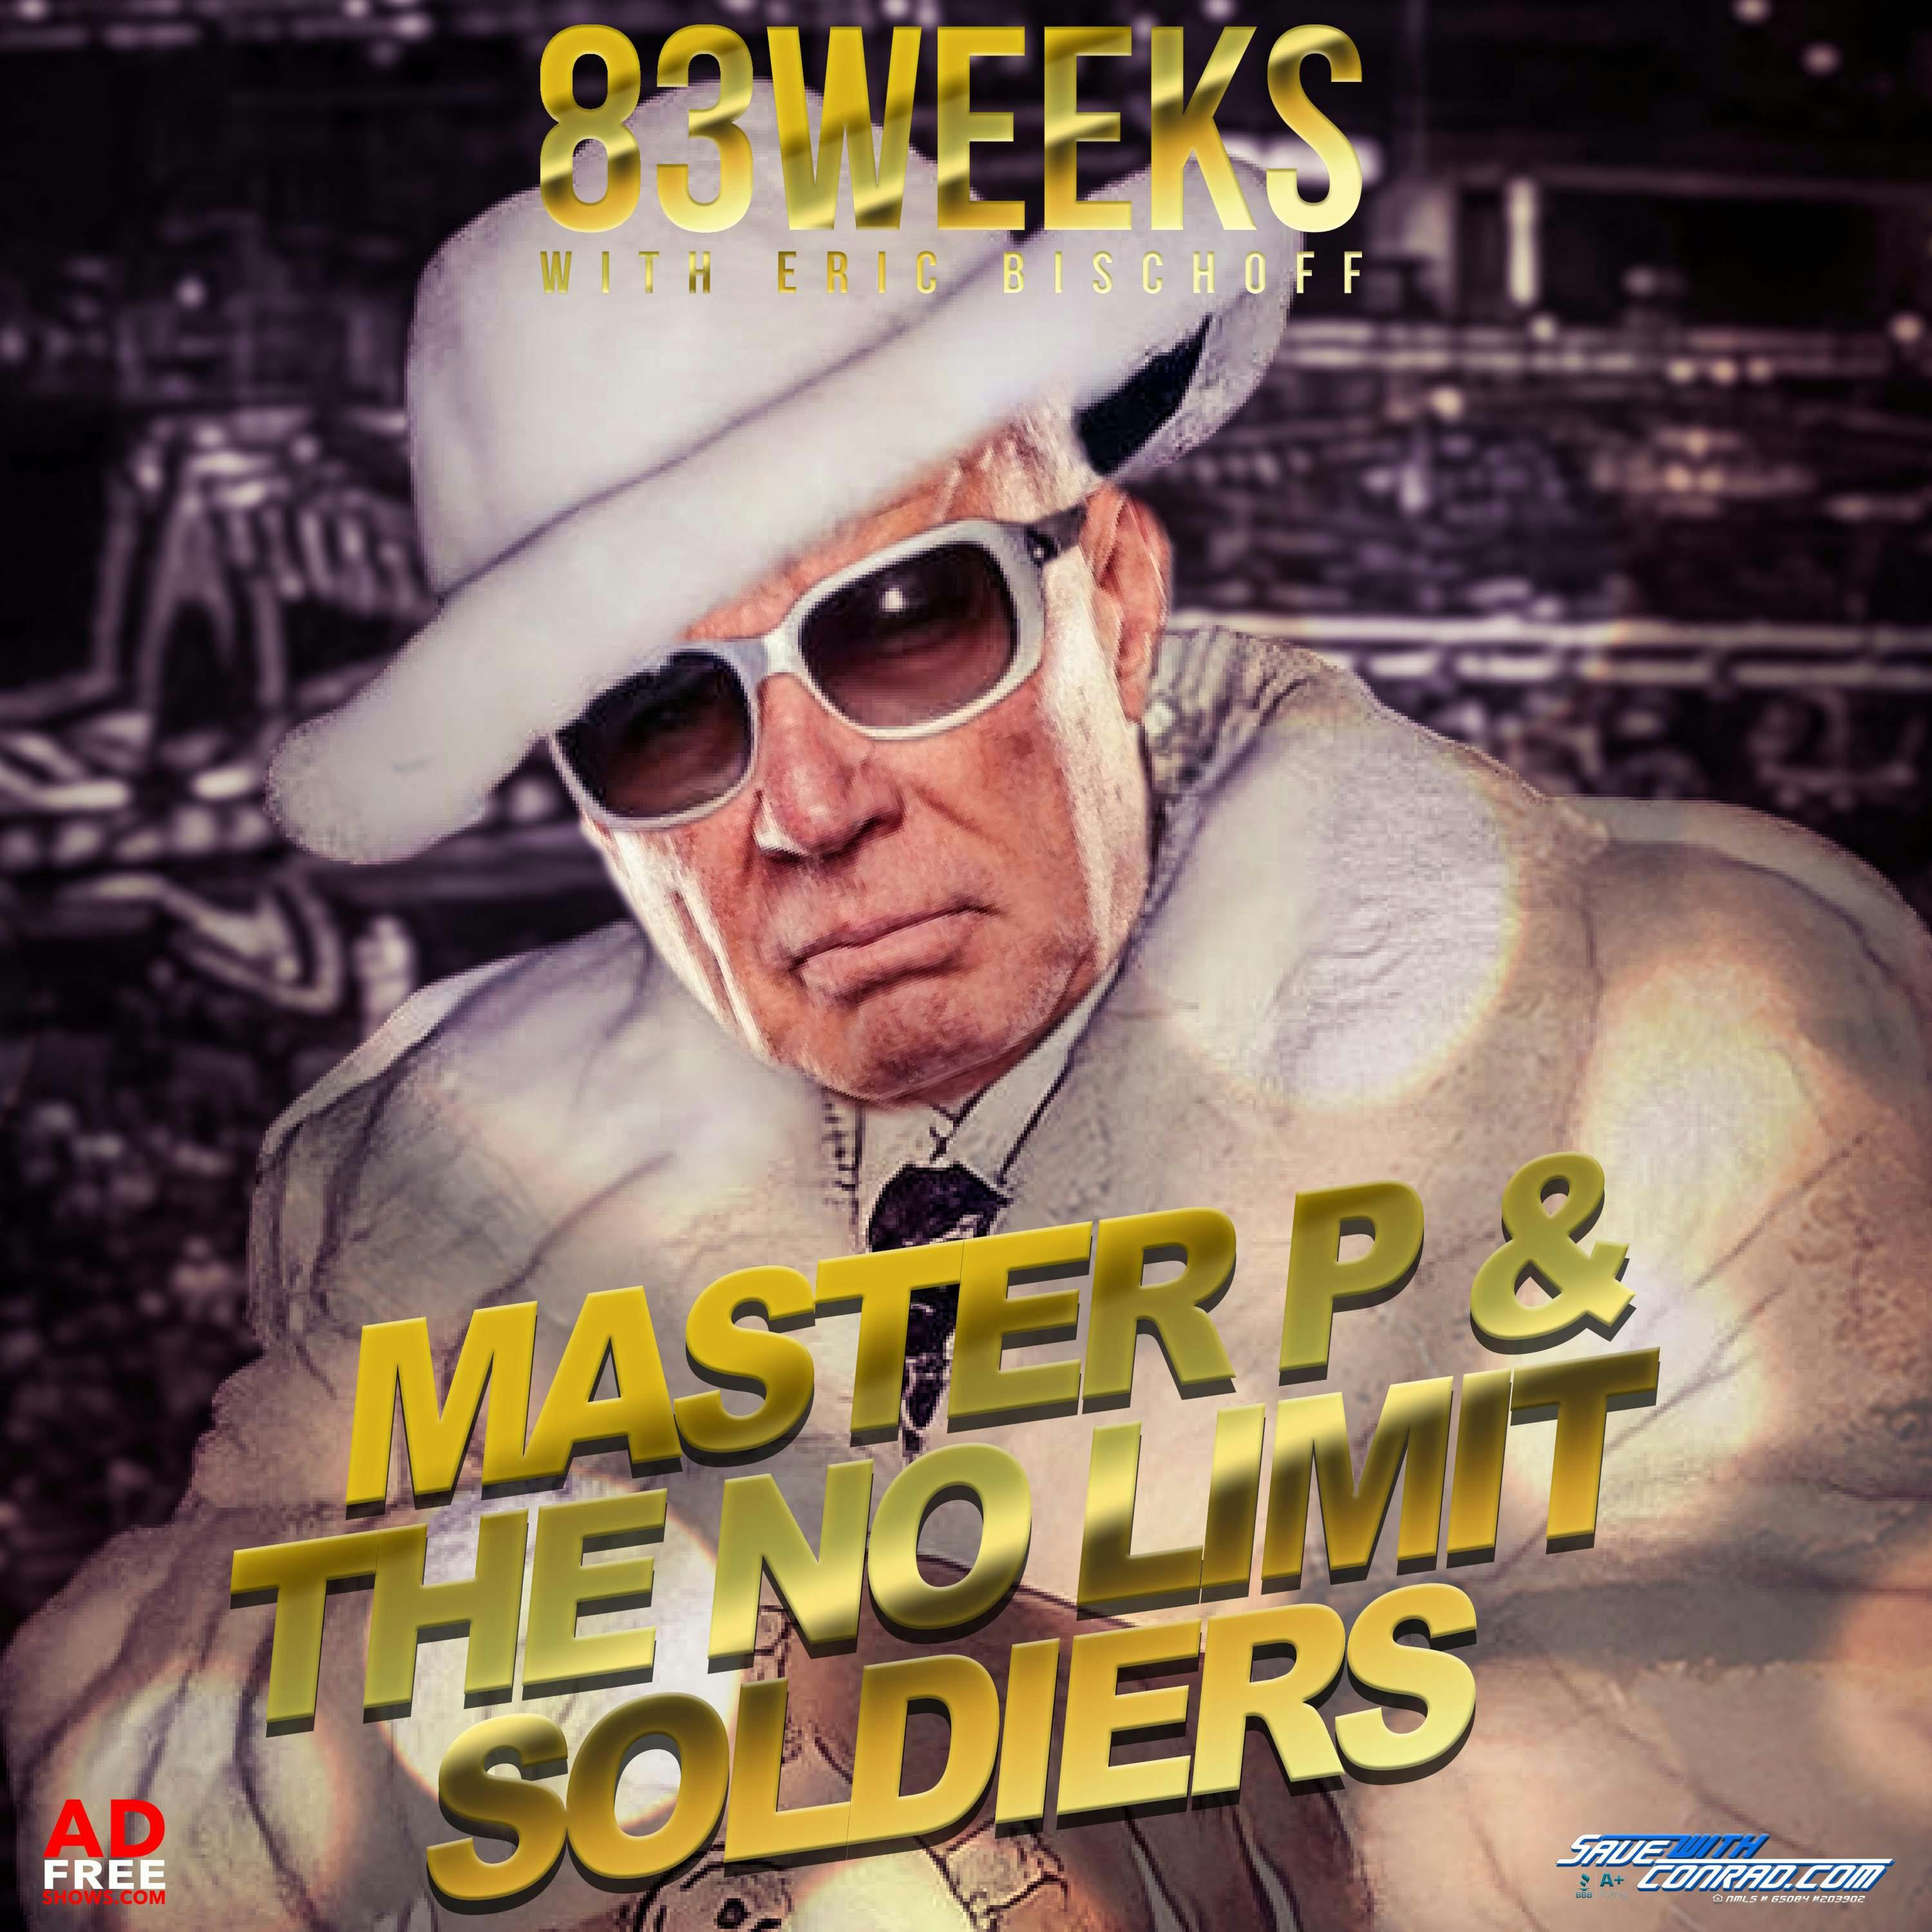 83 Weeks 243: Master P and the No limit Soldiers